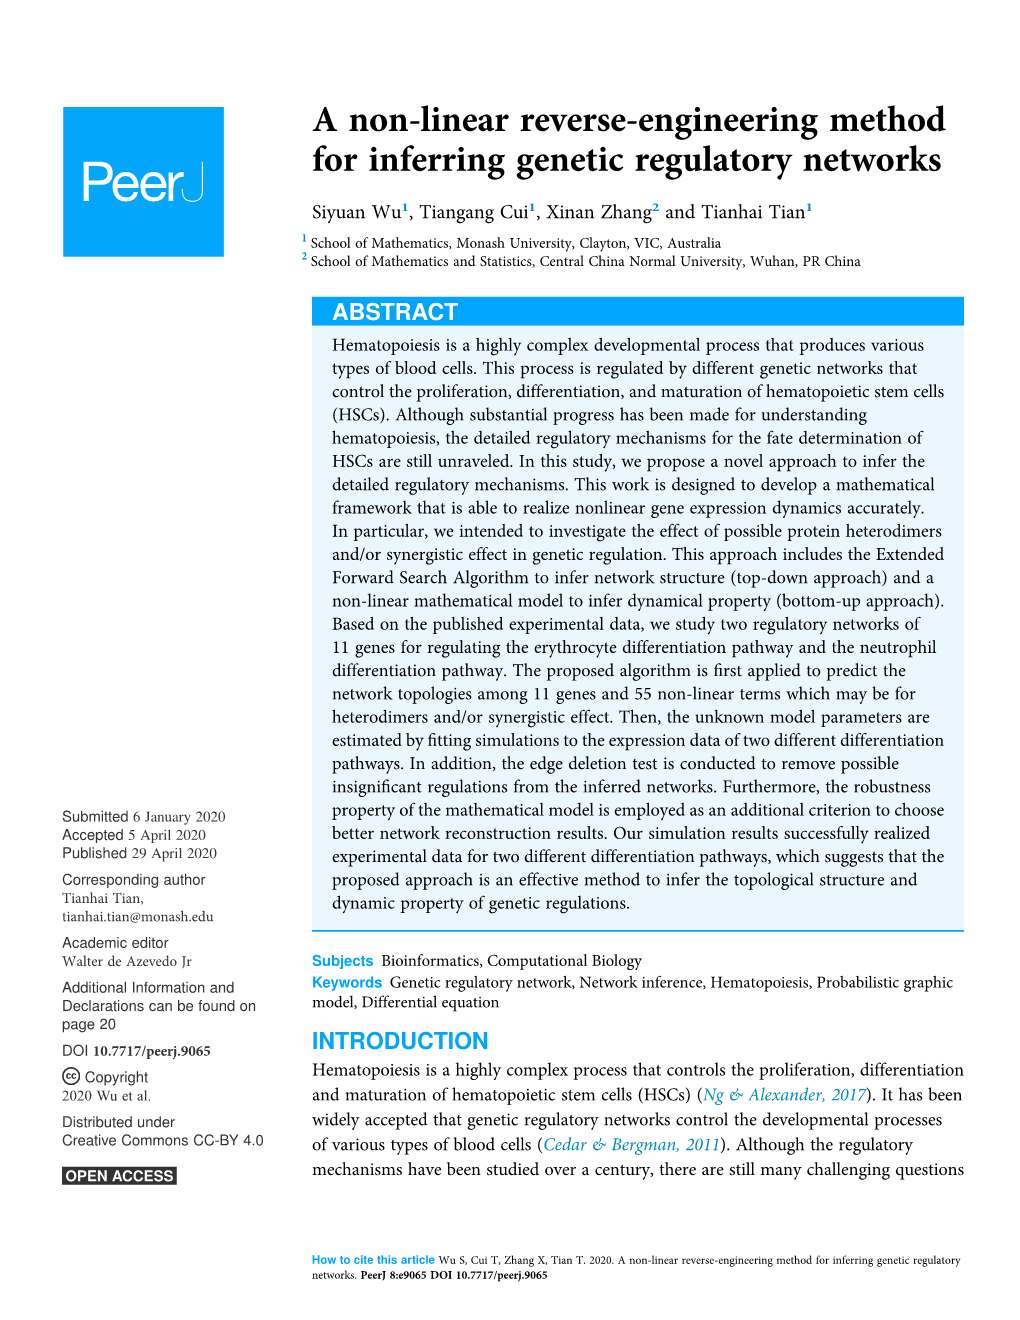 A Non-Linear Reverse-Engineering Method for Inferring Genetic Regulatory Networks